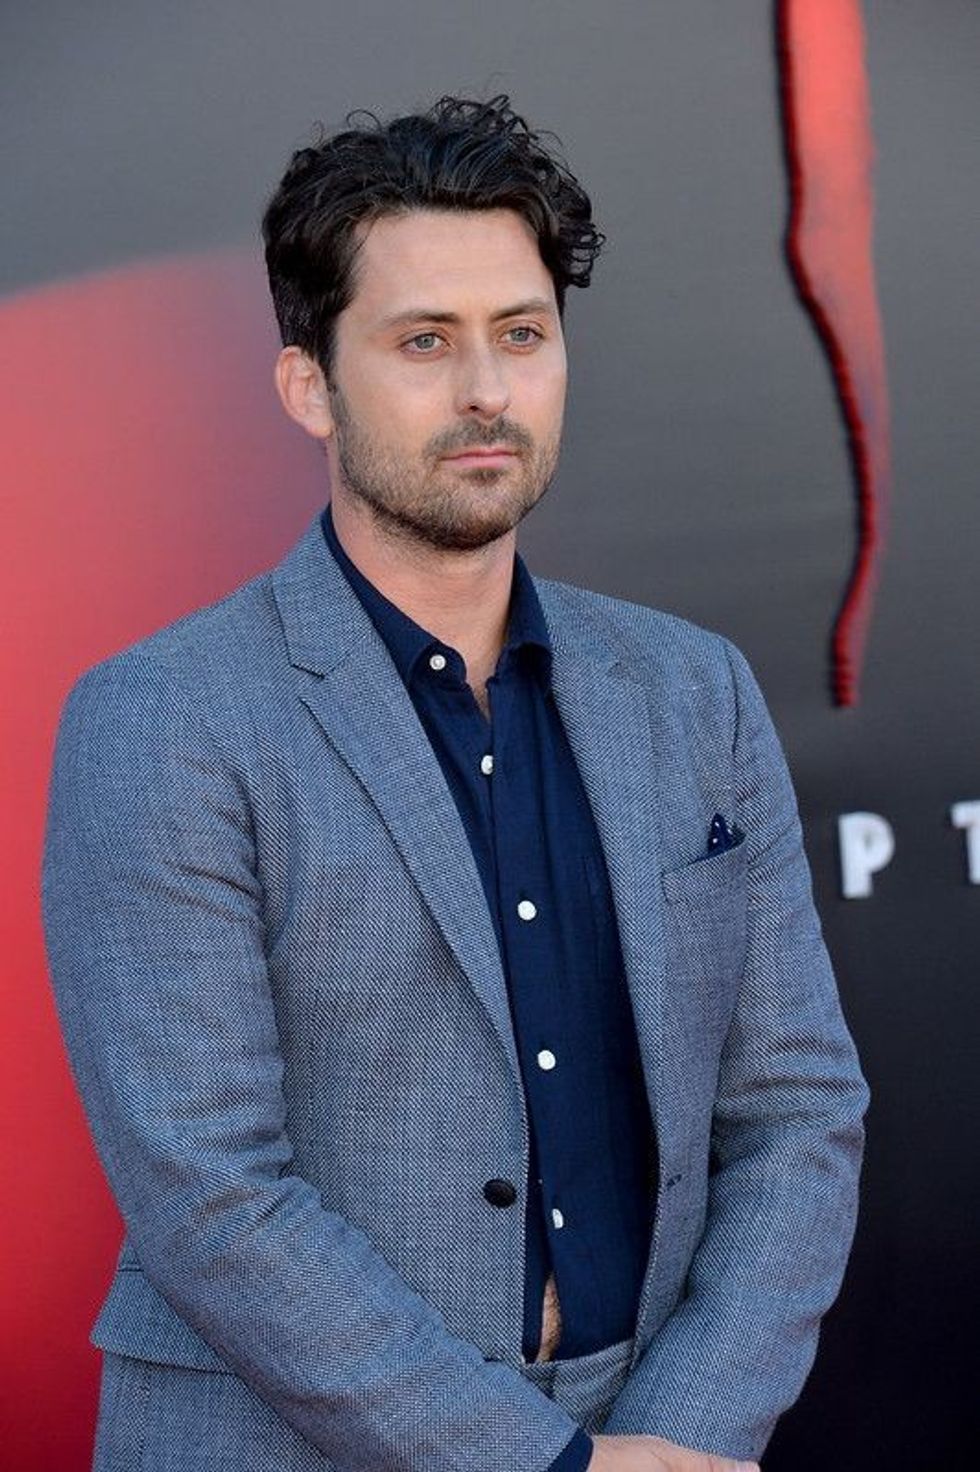 Discover more interesting facts about actor Andy Bean here at Kidadl.